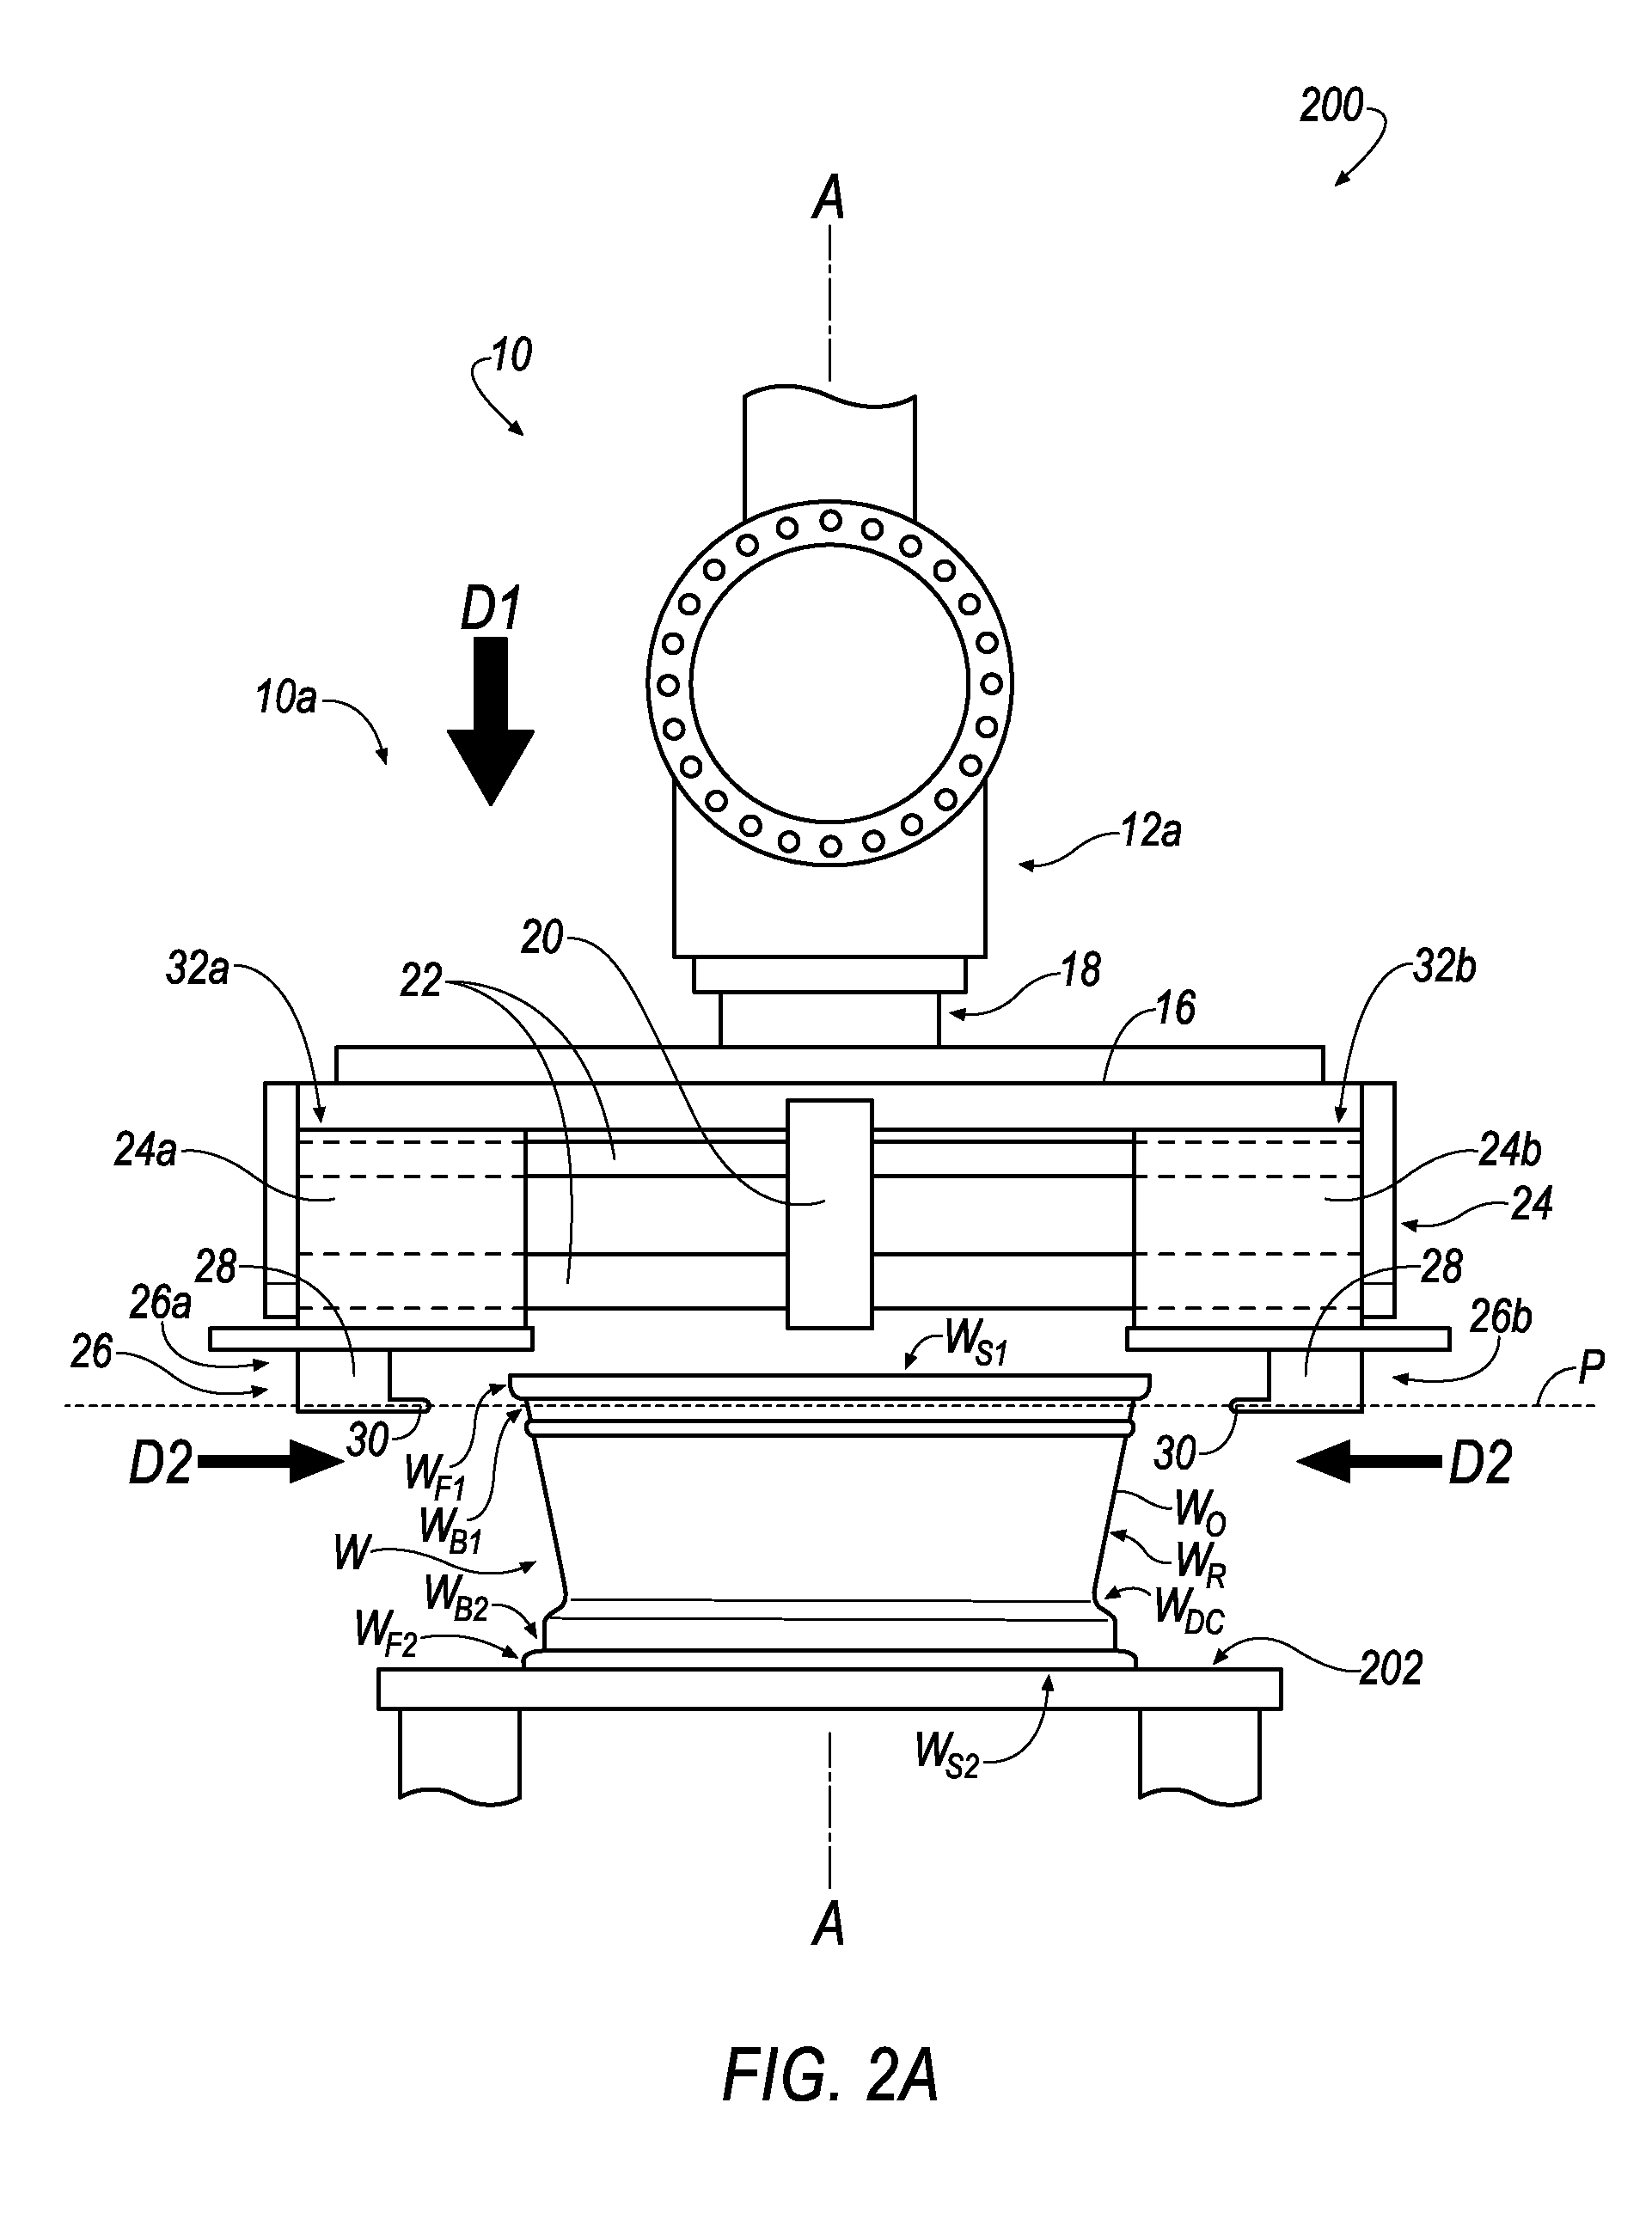 Apparatus, methods, components, and systems for assembling and/or inflating a tire-wheel assembly